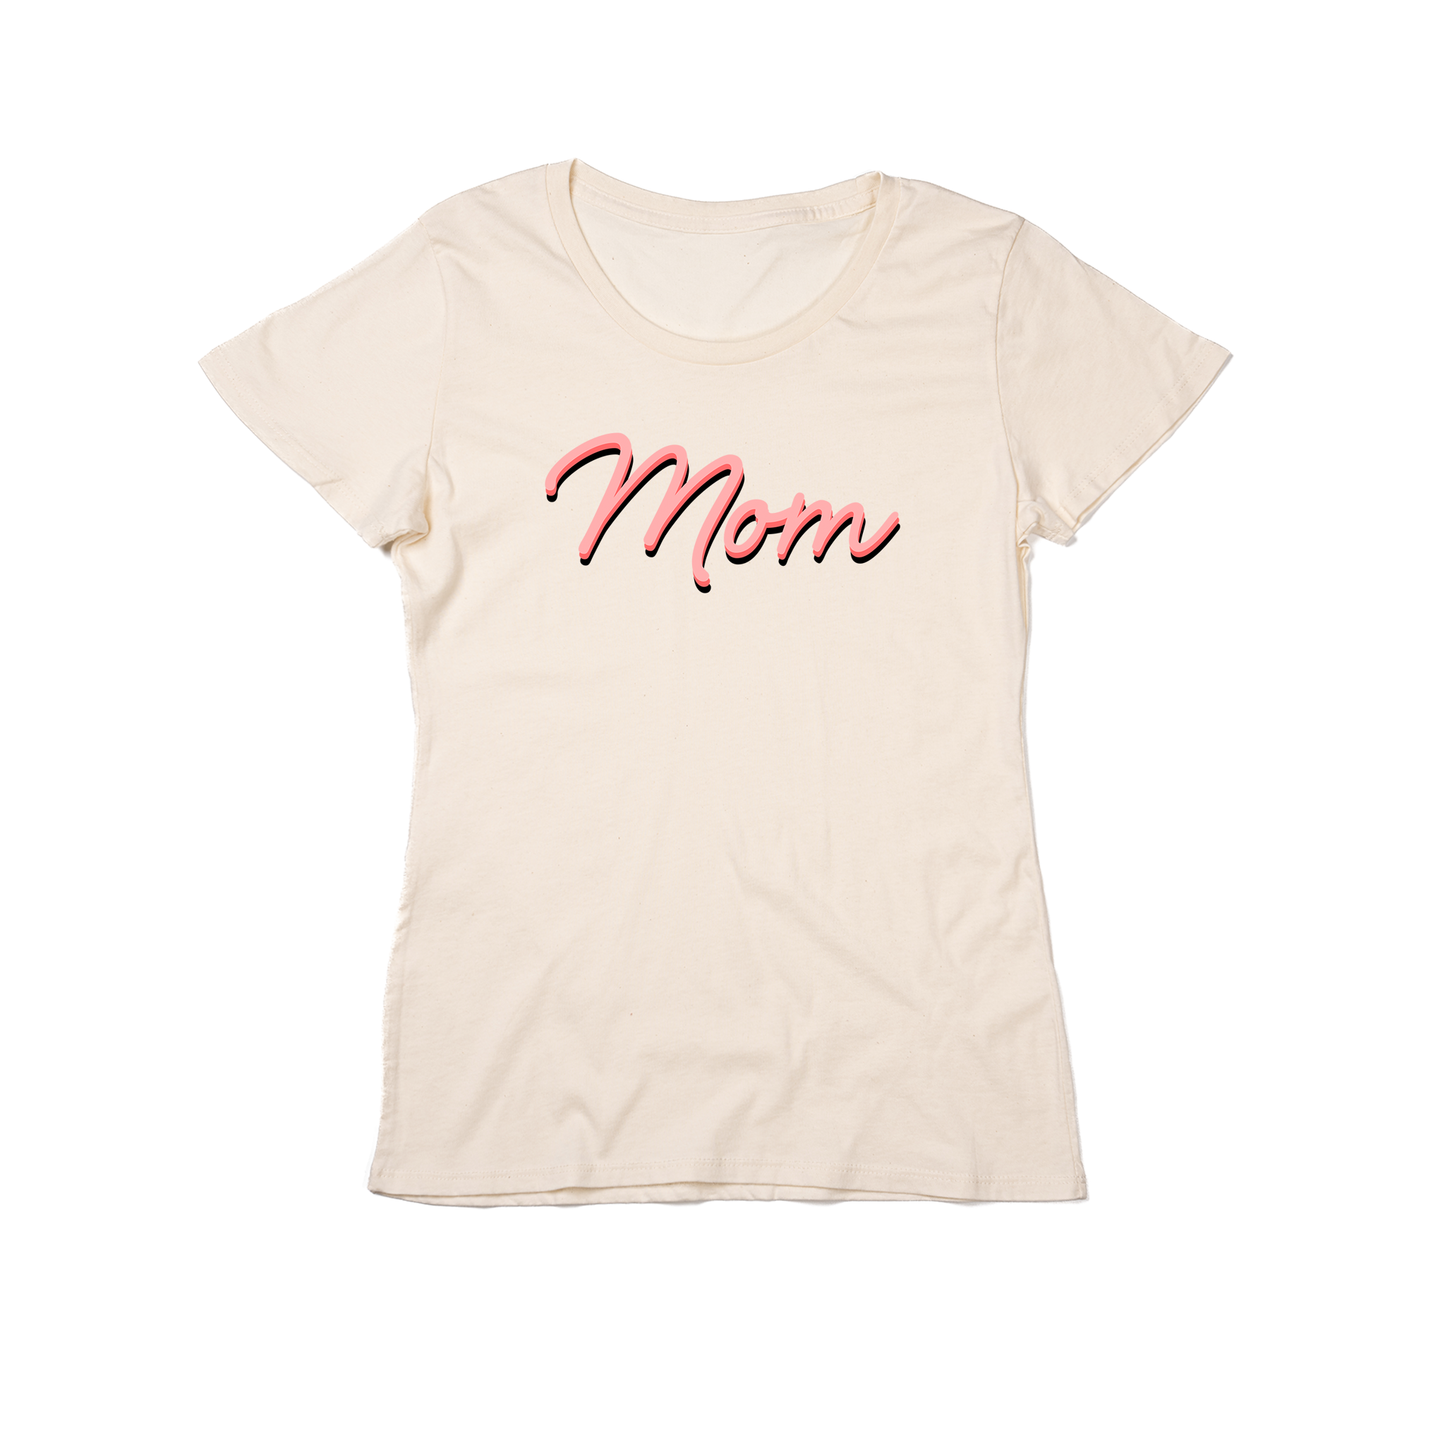 Mom (90's Inspired, Pink) - Women's Fitted Tee (Natural)